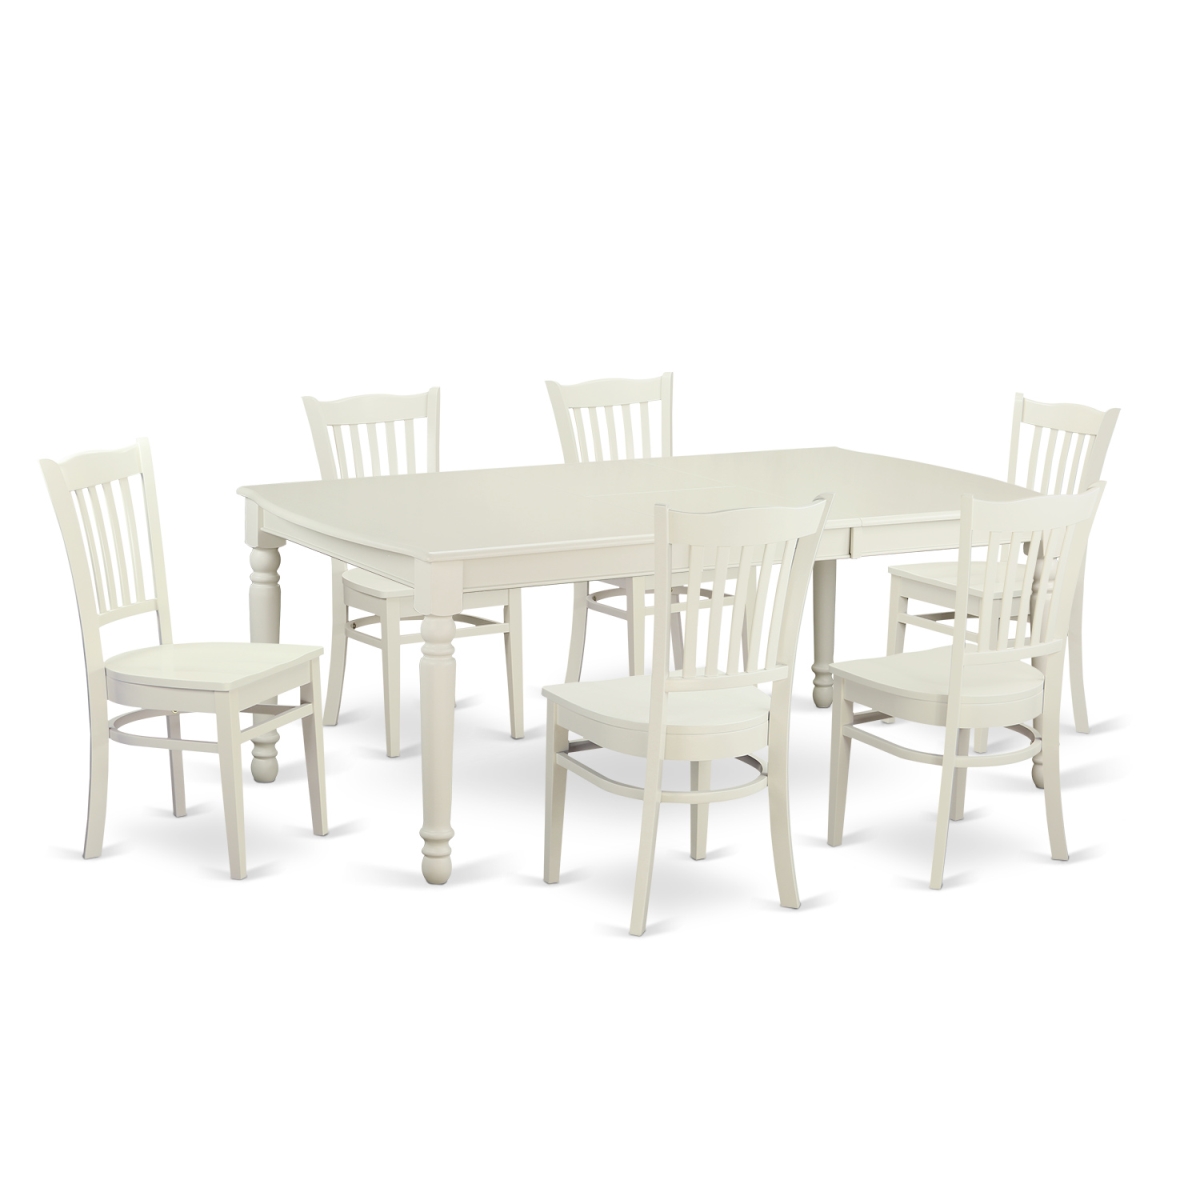 Picture of East West Furniture DOGR7-LWH-W Dining Set with 6 Table & 6 Chairs, Linen White - 7 Piece